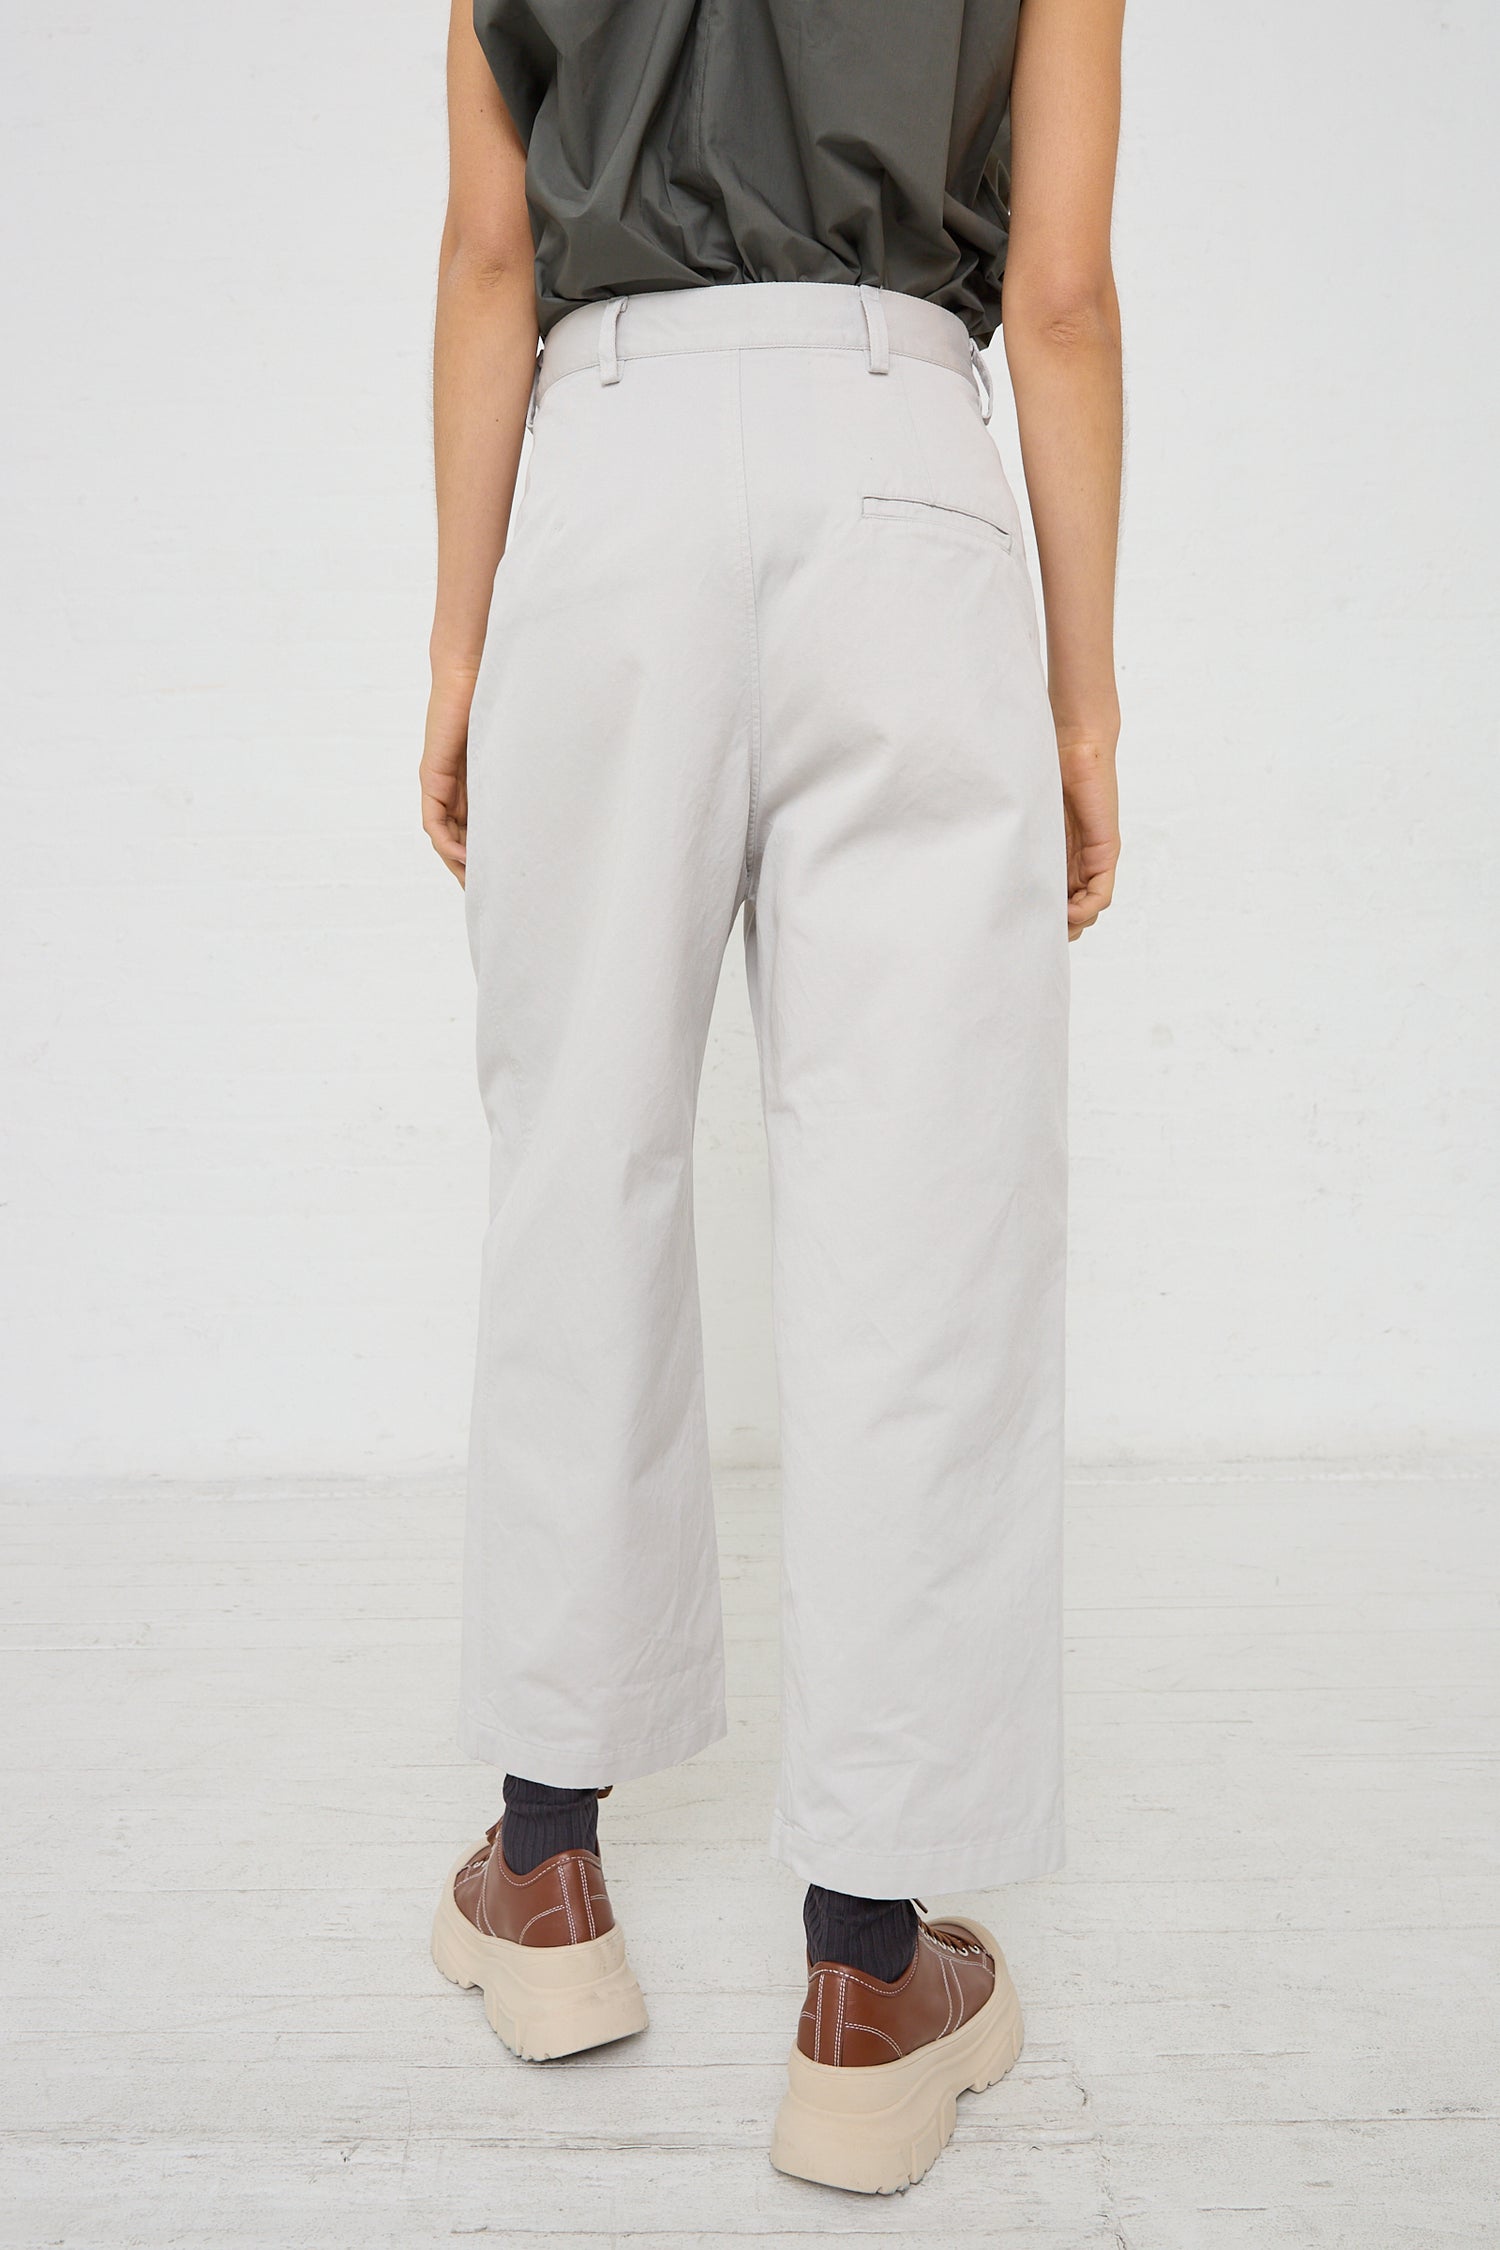 The back view of a woman wearing a low-rise, Sofie D'Hoore Cotton Twill Proof Pant in Mastic with pleat detail.